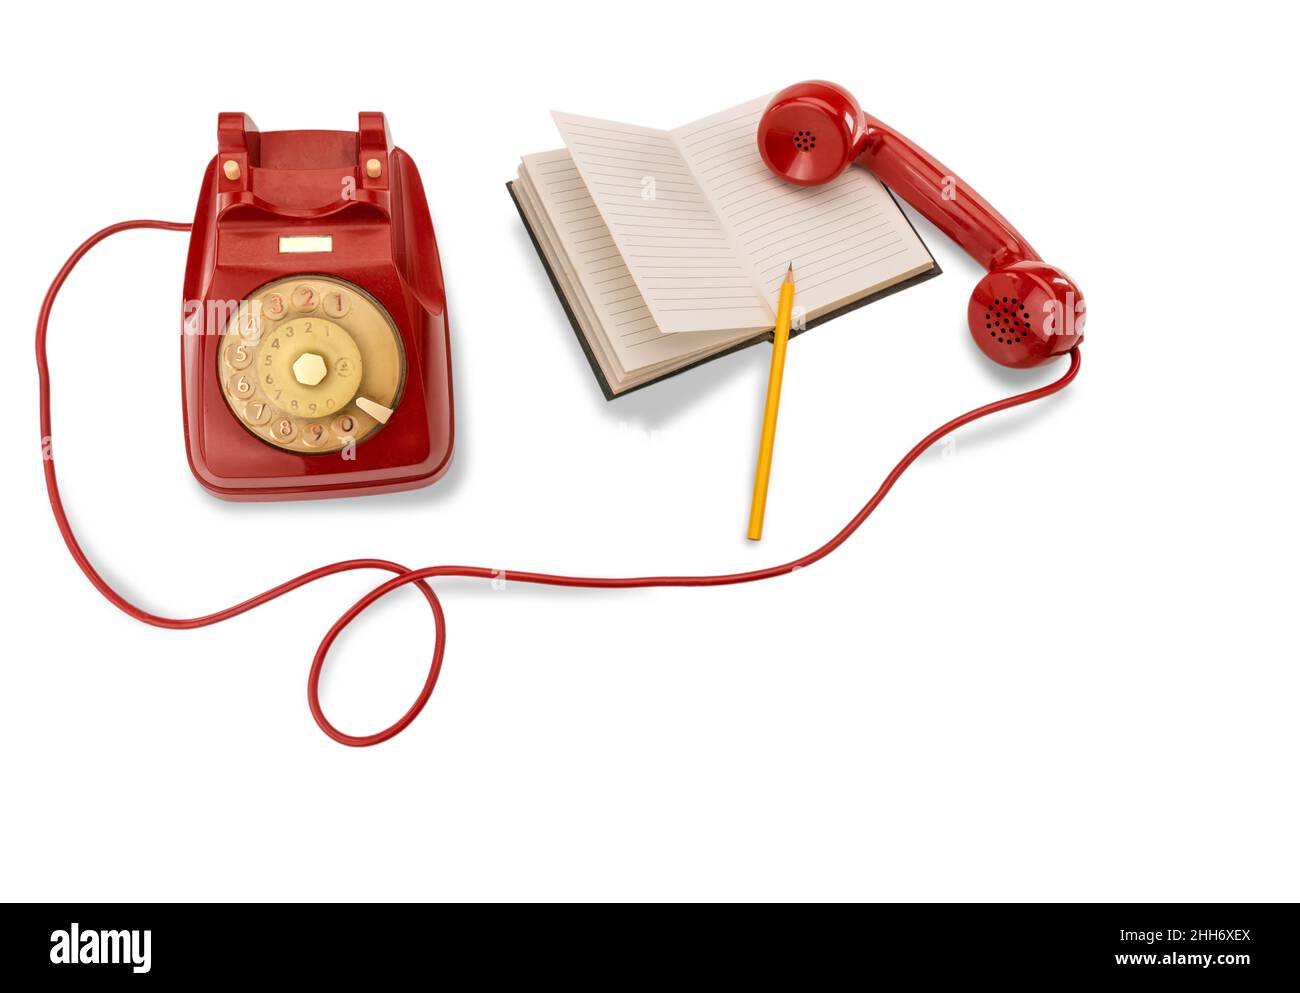 Old red rotating dial telephon with lined notebook and yellow pencil in top view isolated on white background, copy space Stock Photo